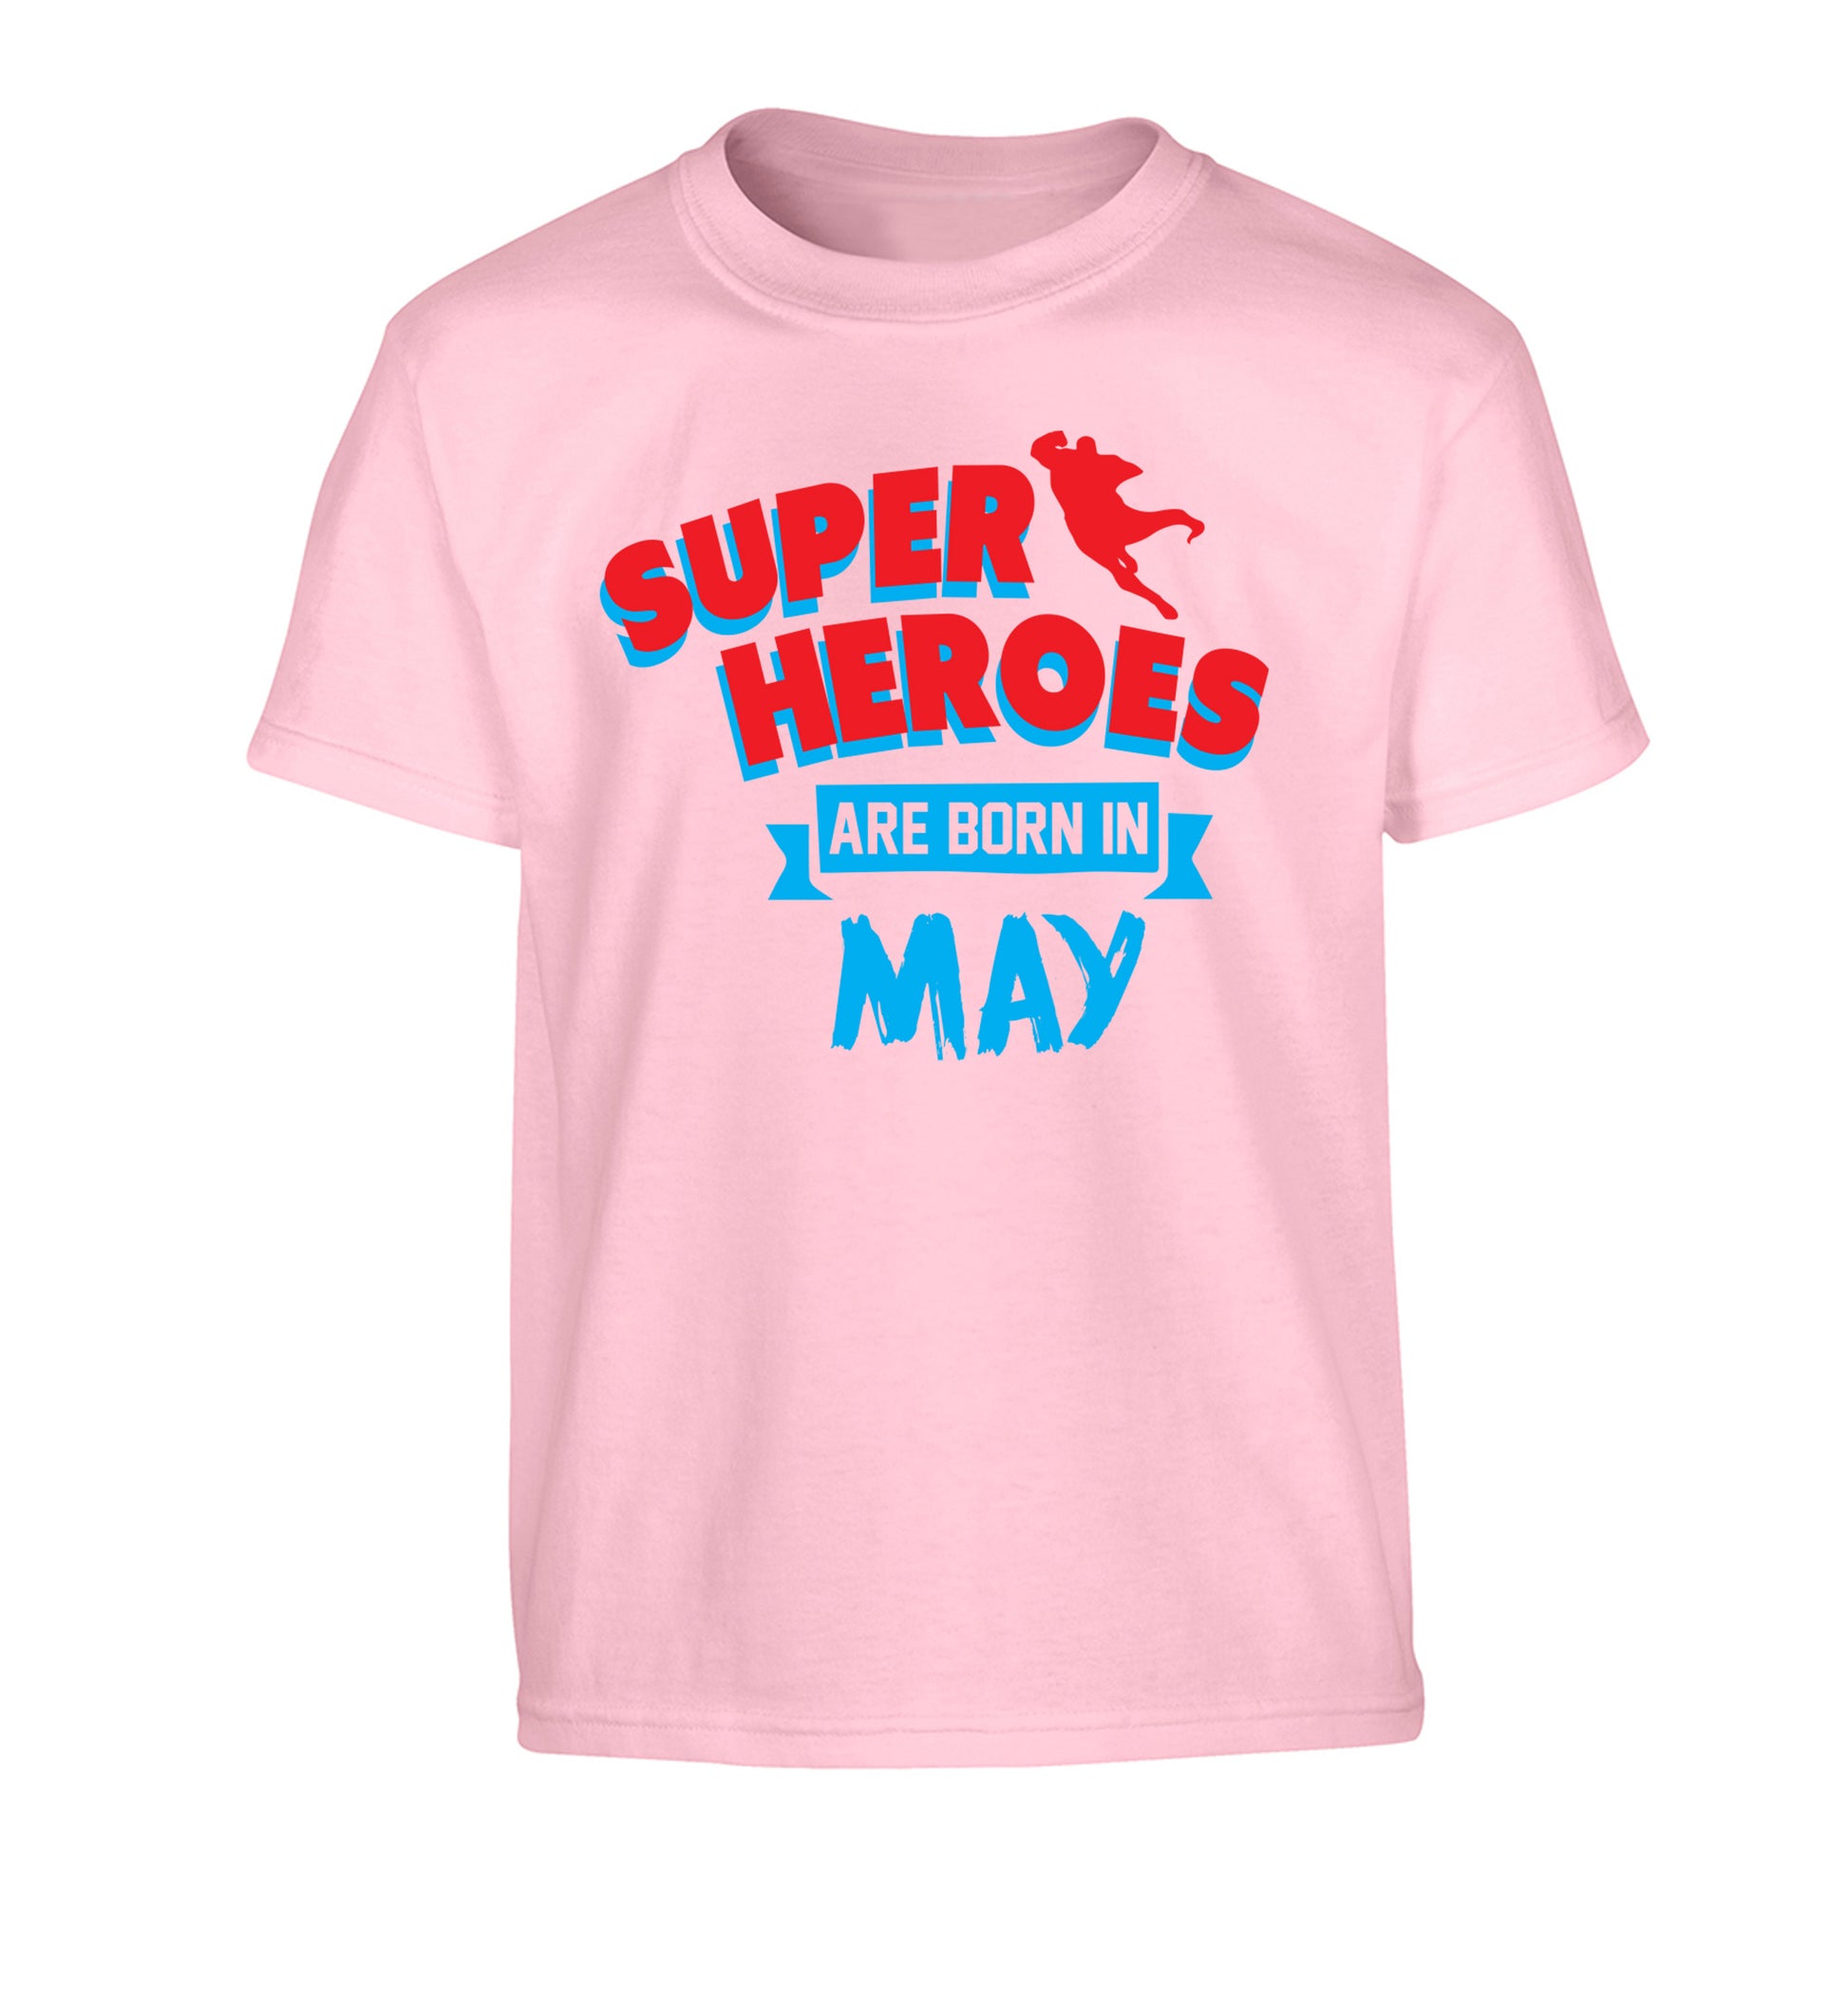 Superheros are born in May Children's light pink Tshirt 12-13 Years